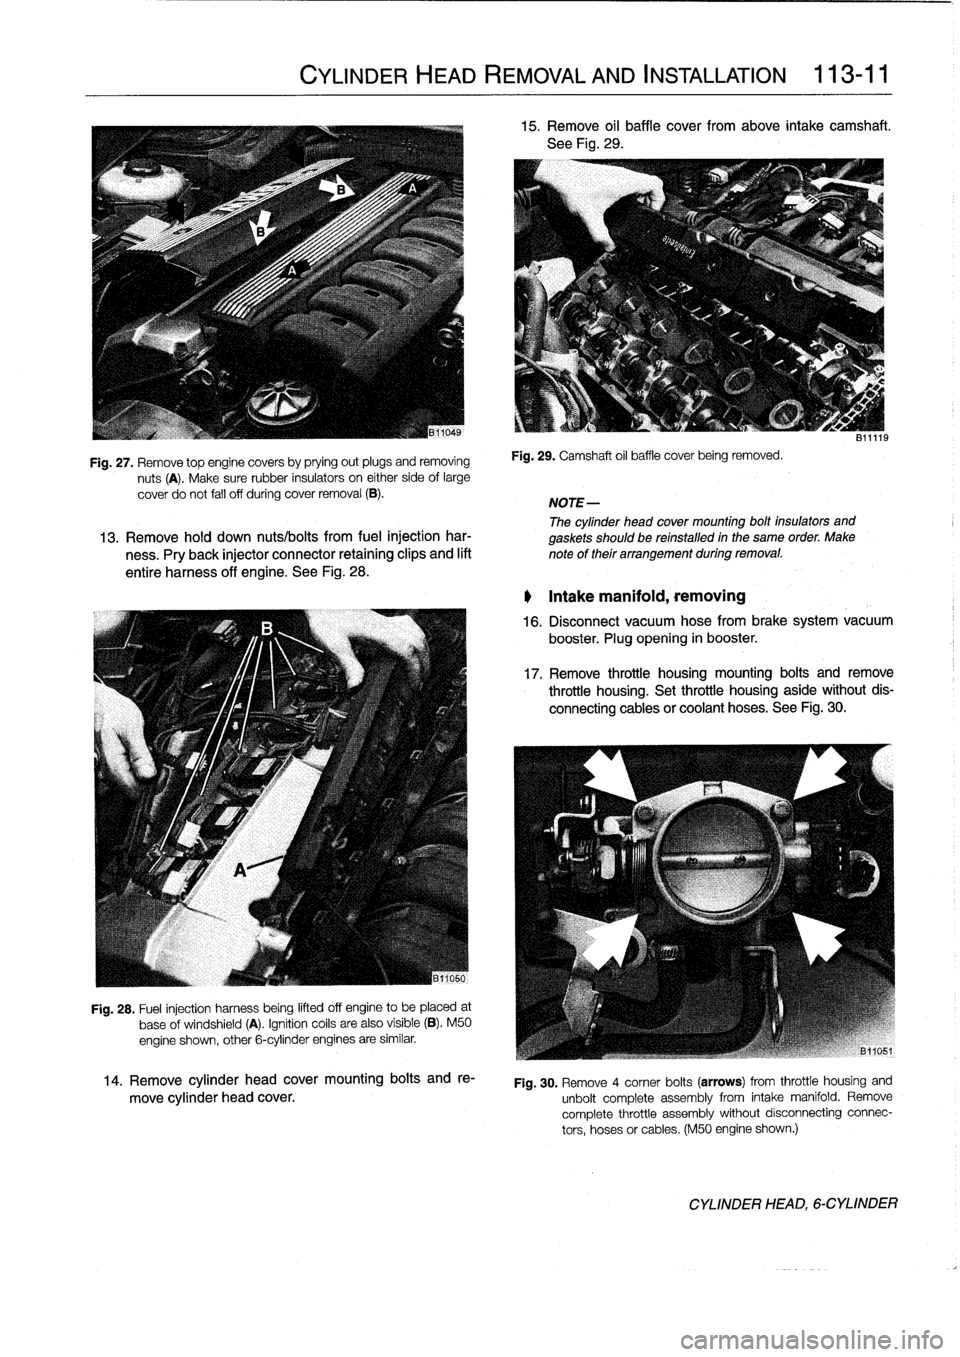 BMW 328i 1994 E36 Service Manual 
Fig
.
27
.
Remove
top
enginecovers
by
prying
out
plugs
and
removing

nuts
(A)
.
Make
sure
rubber
insulators
on
either
side
of
large

cover
do
not
fall
off
during
cover
removal
(B)
.

Fig
.
28
.
Fuel
